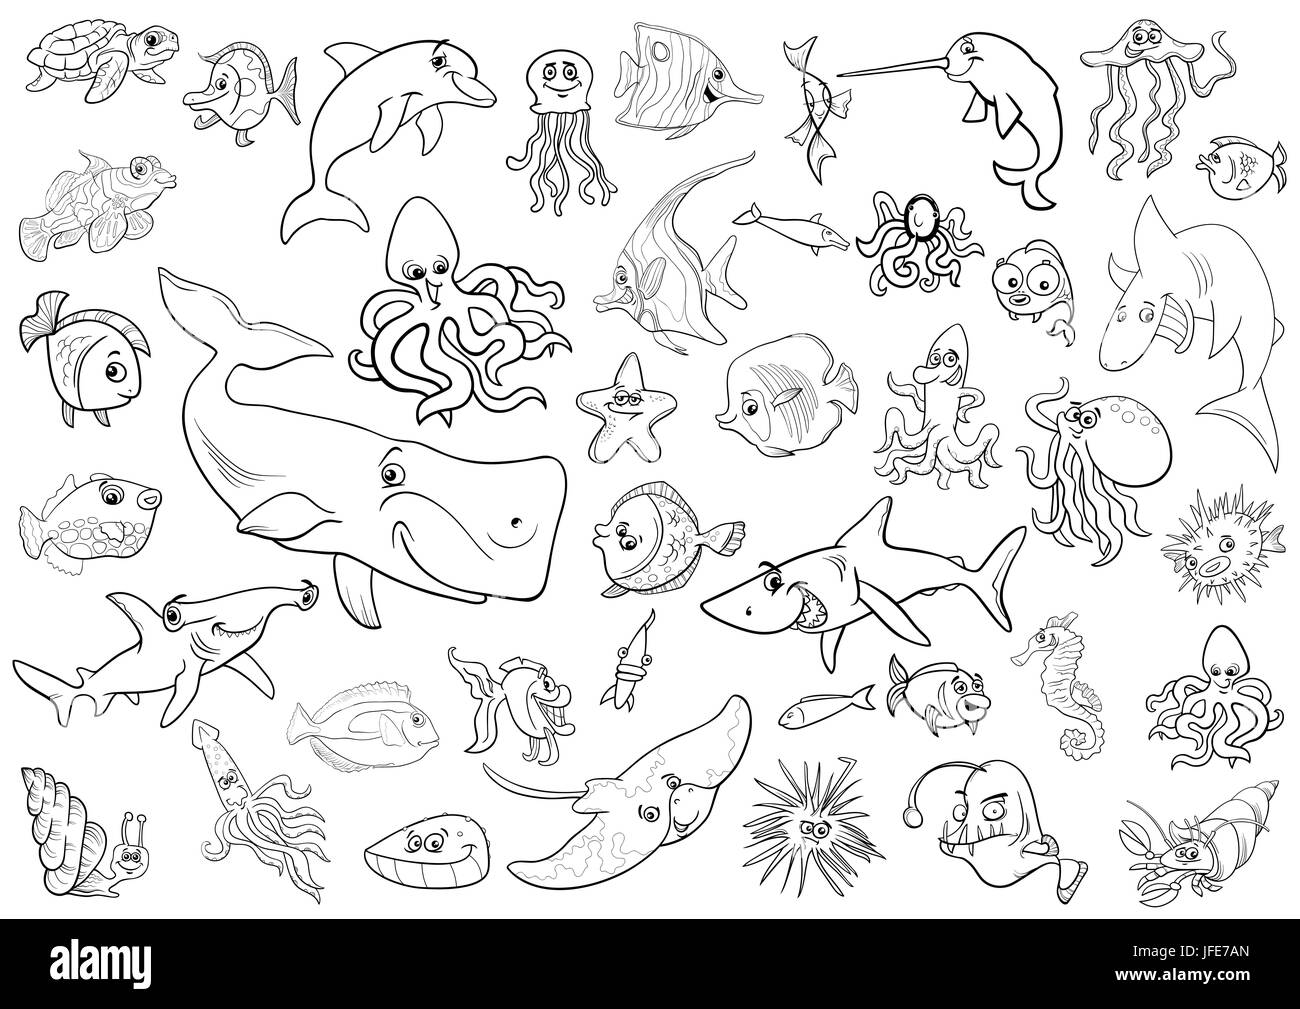 sea life animals coloring page Stock Photo - Alamy